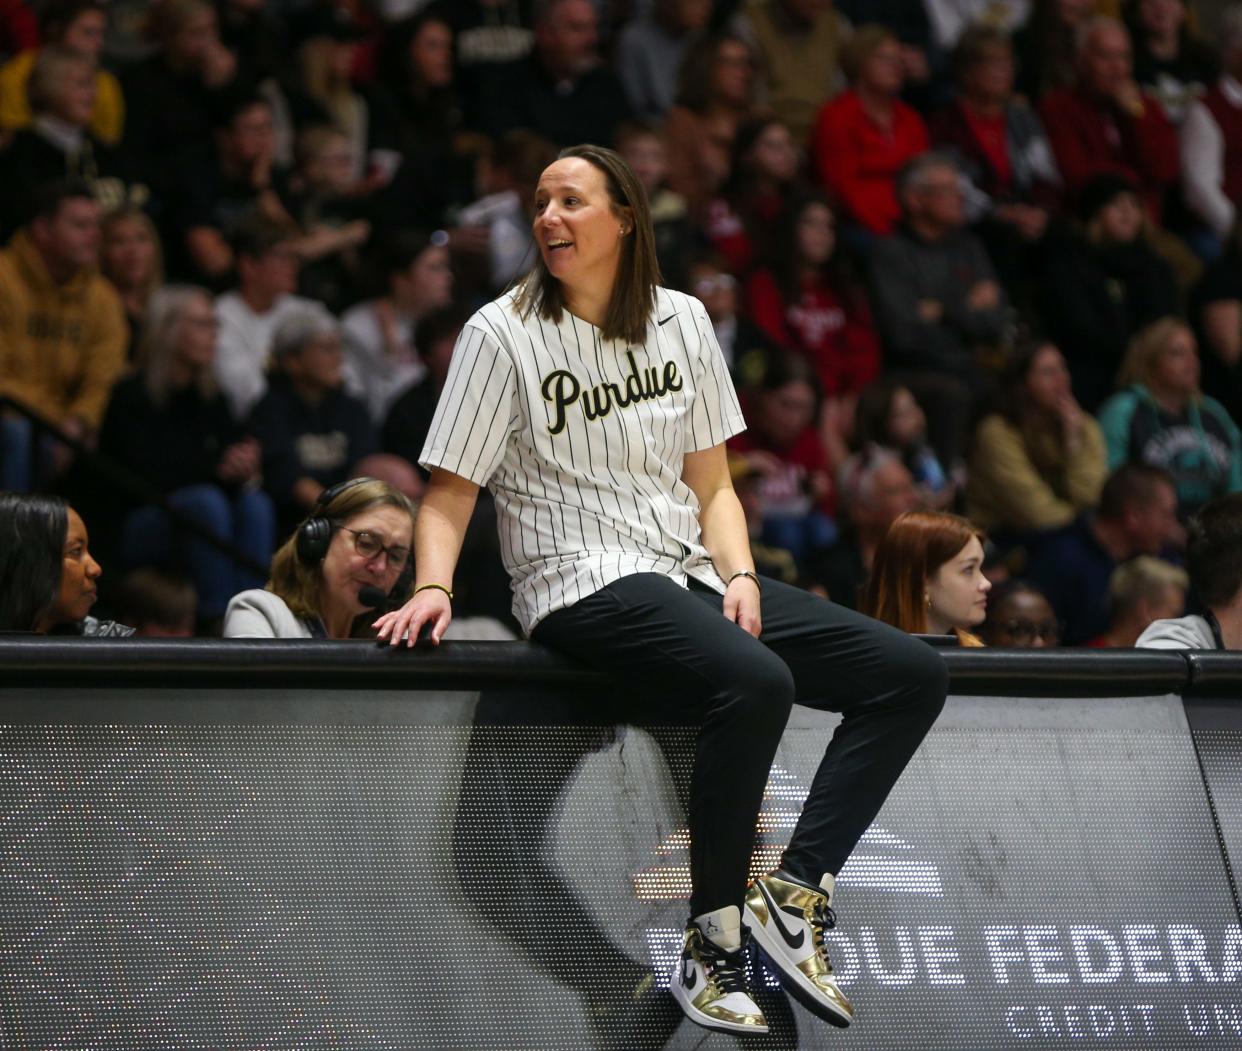 Purdue Boilermakers women’s basketball head coach Katie Gearlds watches her players during the NCAA women's basketball game against the Indiana Hoosiers, Sunday, Feb. 5, 2023, at Mackey Arena in West Lafayette, Ind. Indiana Hoosiers won 69-46.